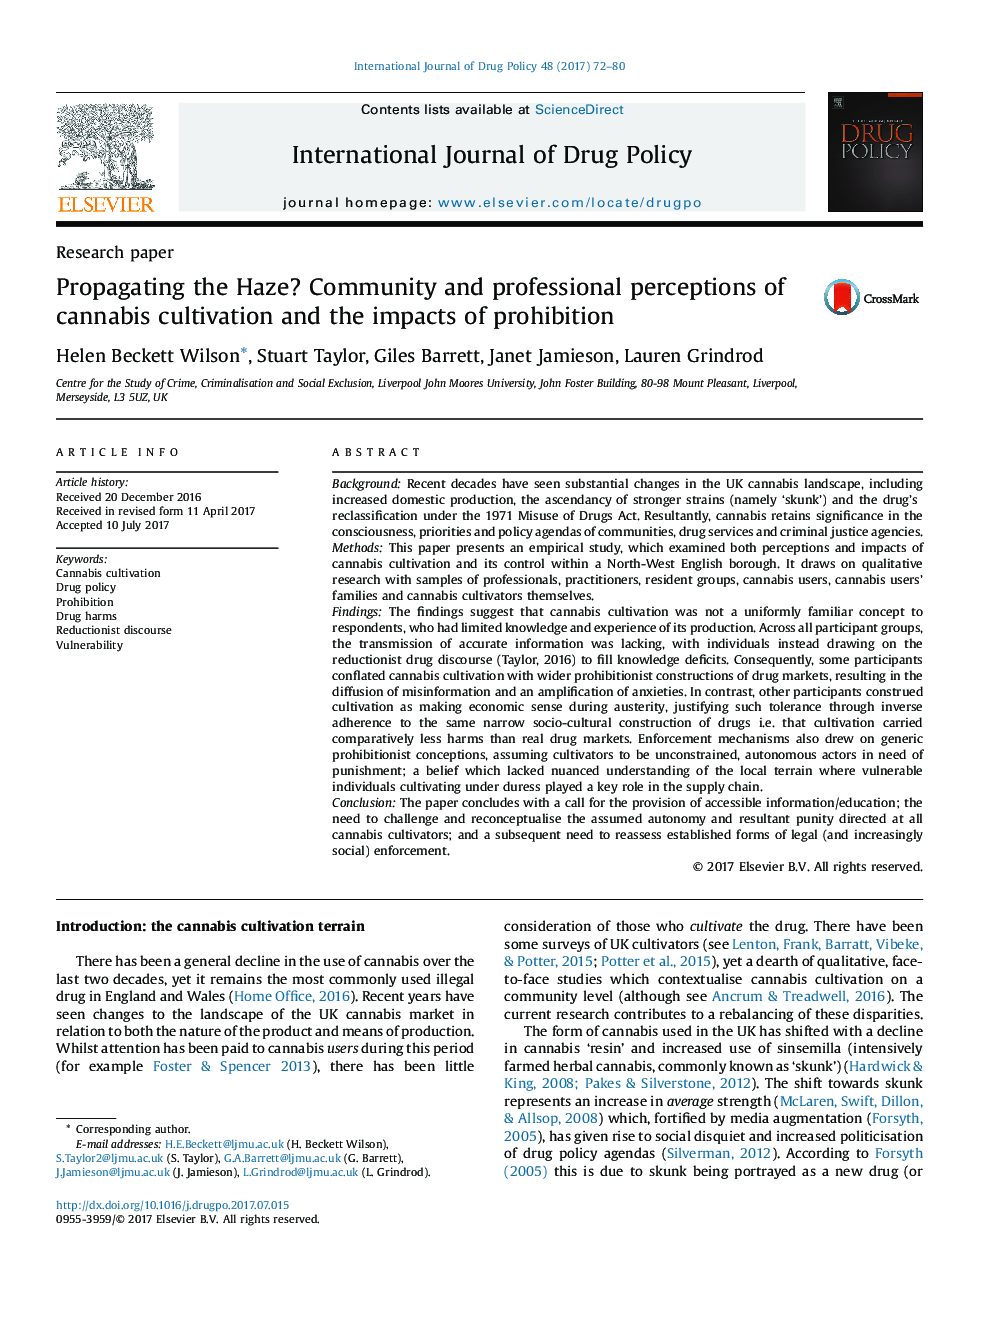 Research paperPropagating the Haze? Community and professional perceptions of cannabis cultivation and the impacts of prohibition